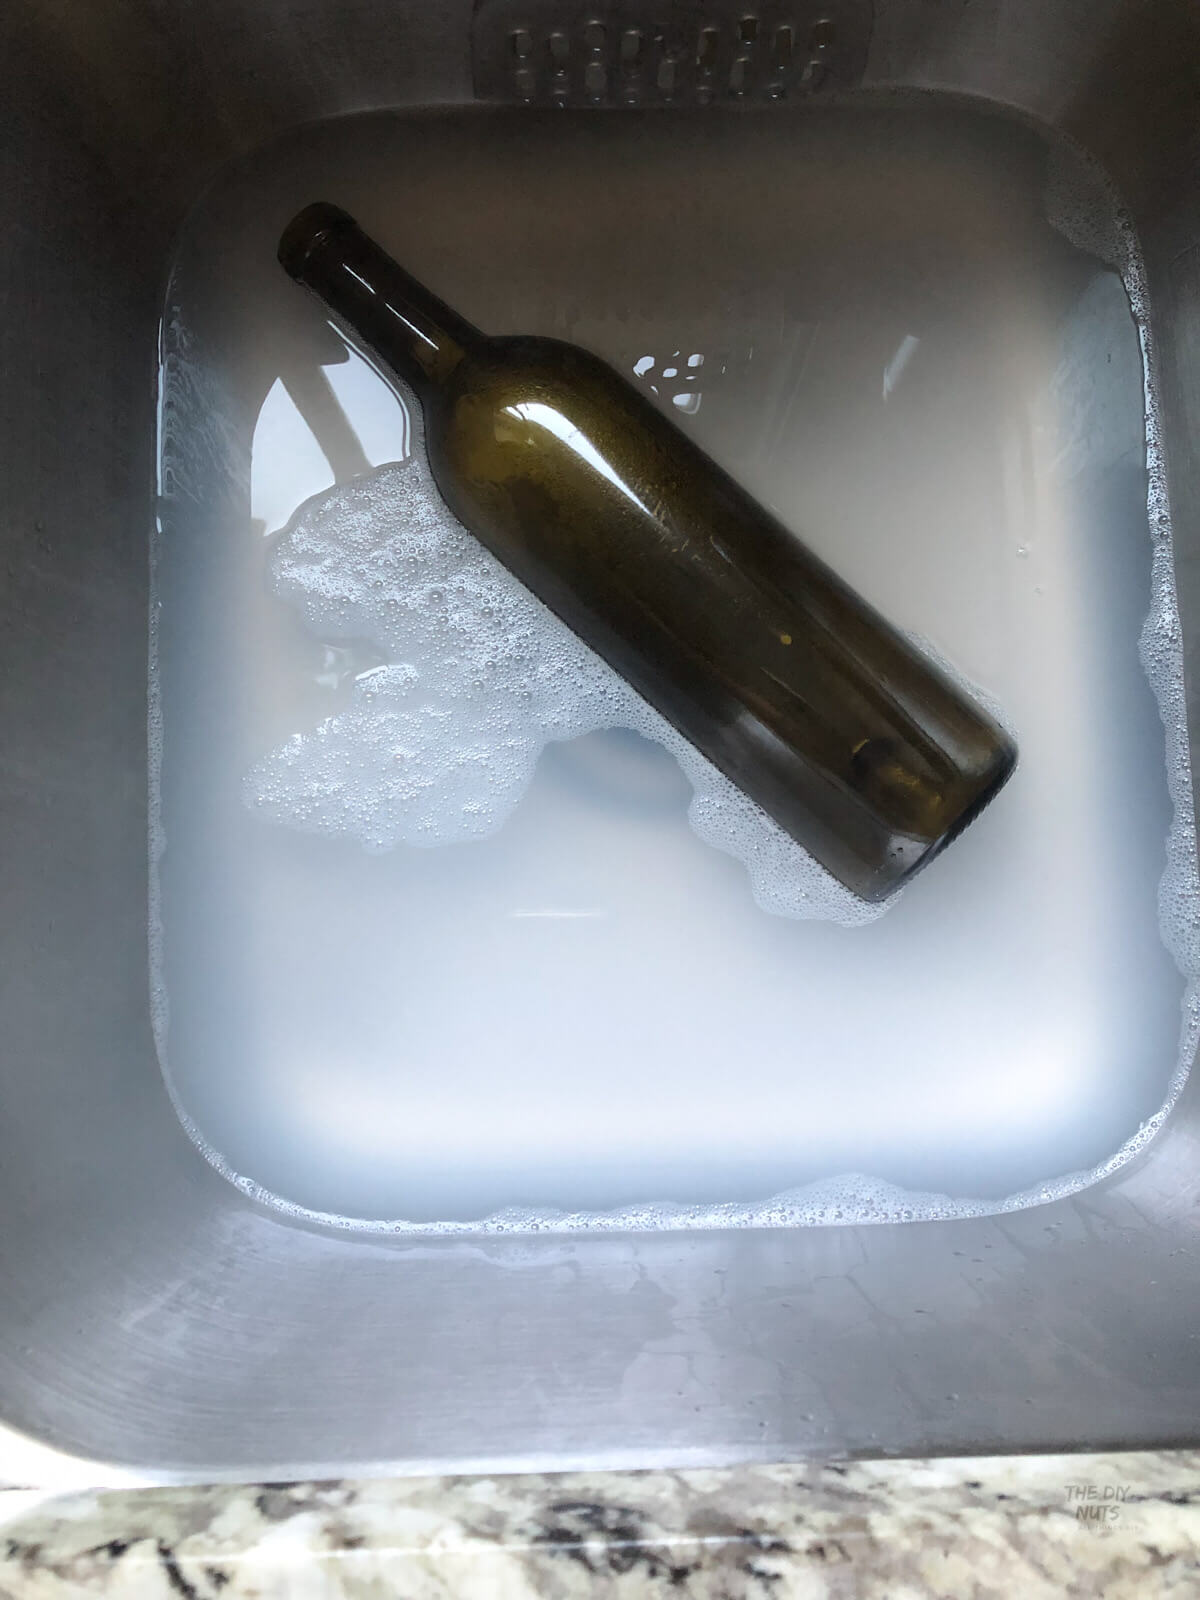 wine bottle with label being soaked in boiling water to remove label in stainless steel sink